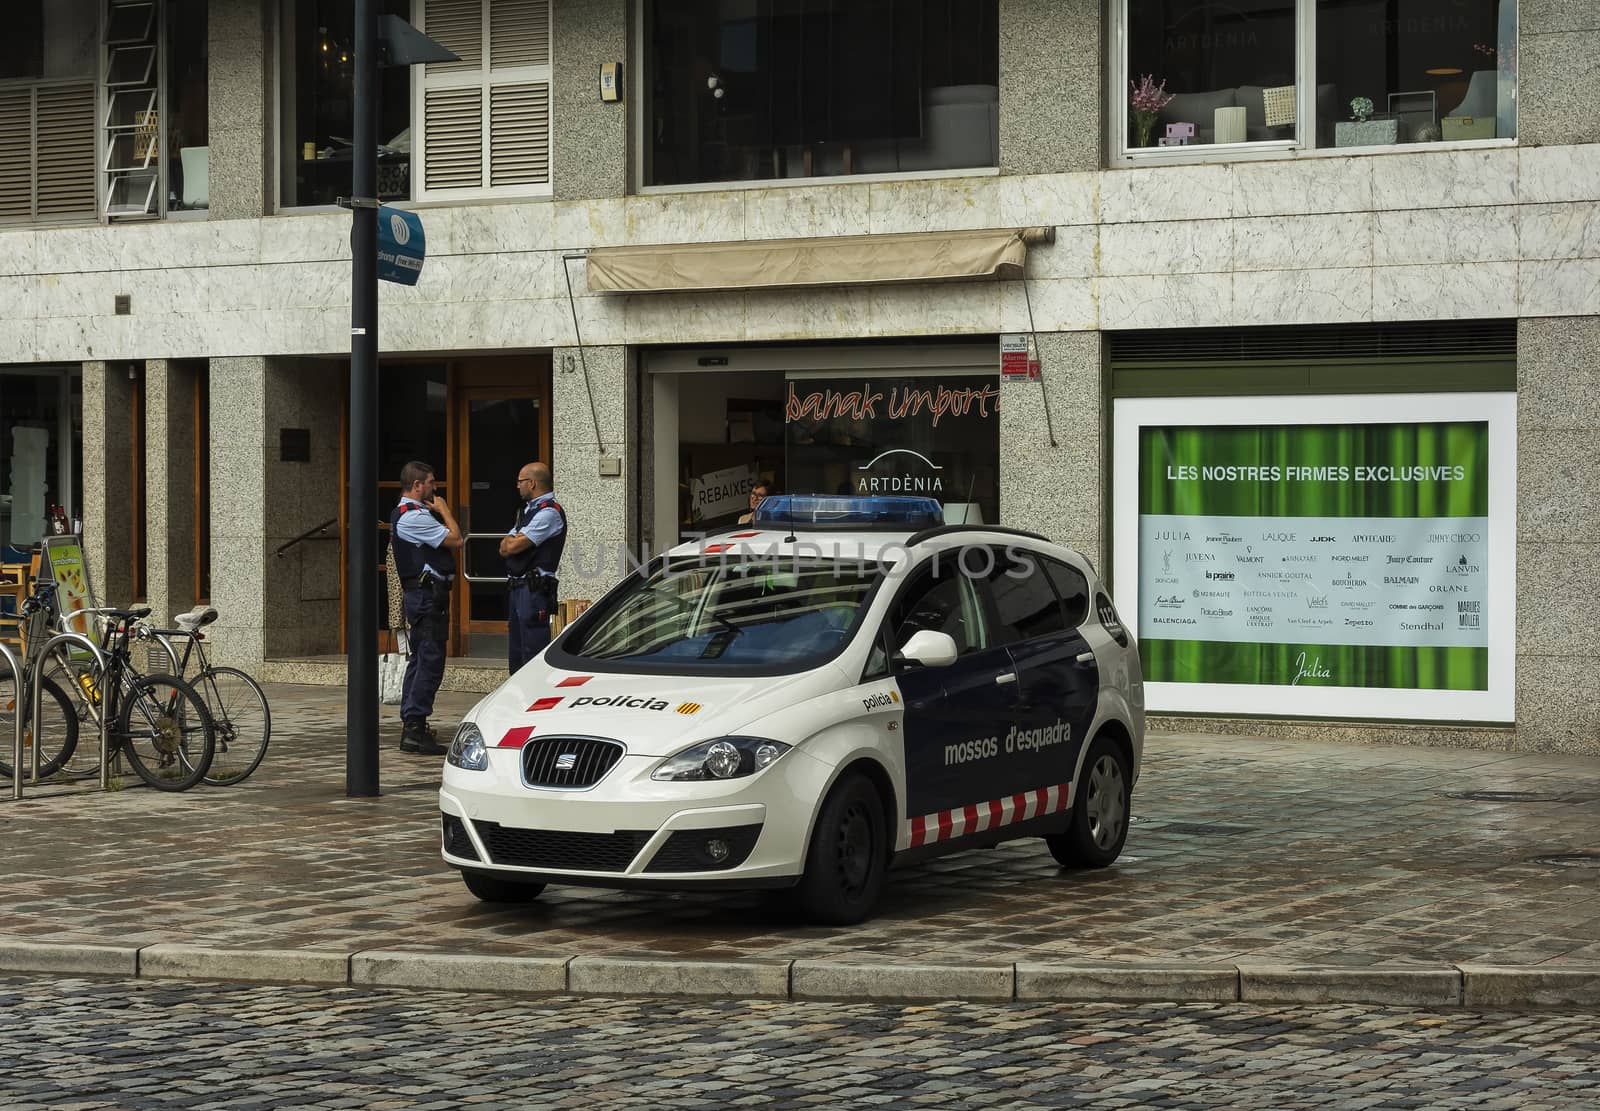 Police car and police on the streets of the city (Girona, Spain) by Grommik